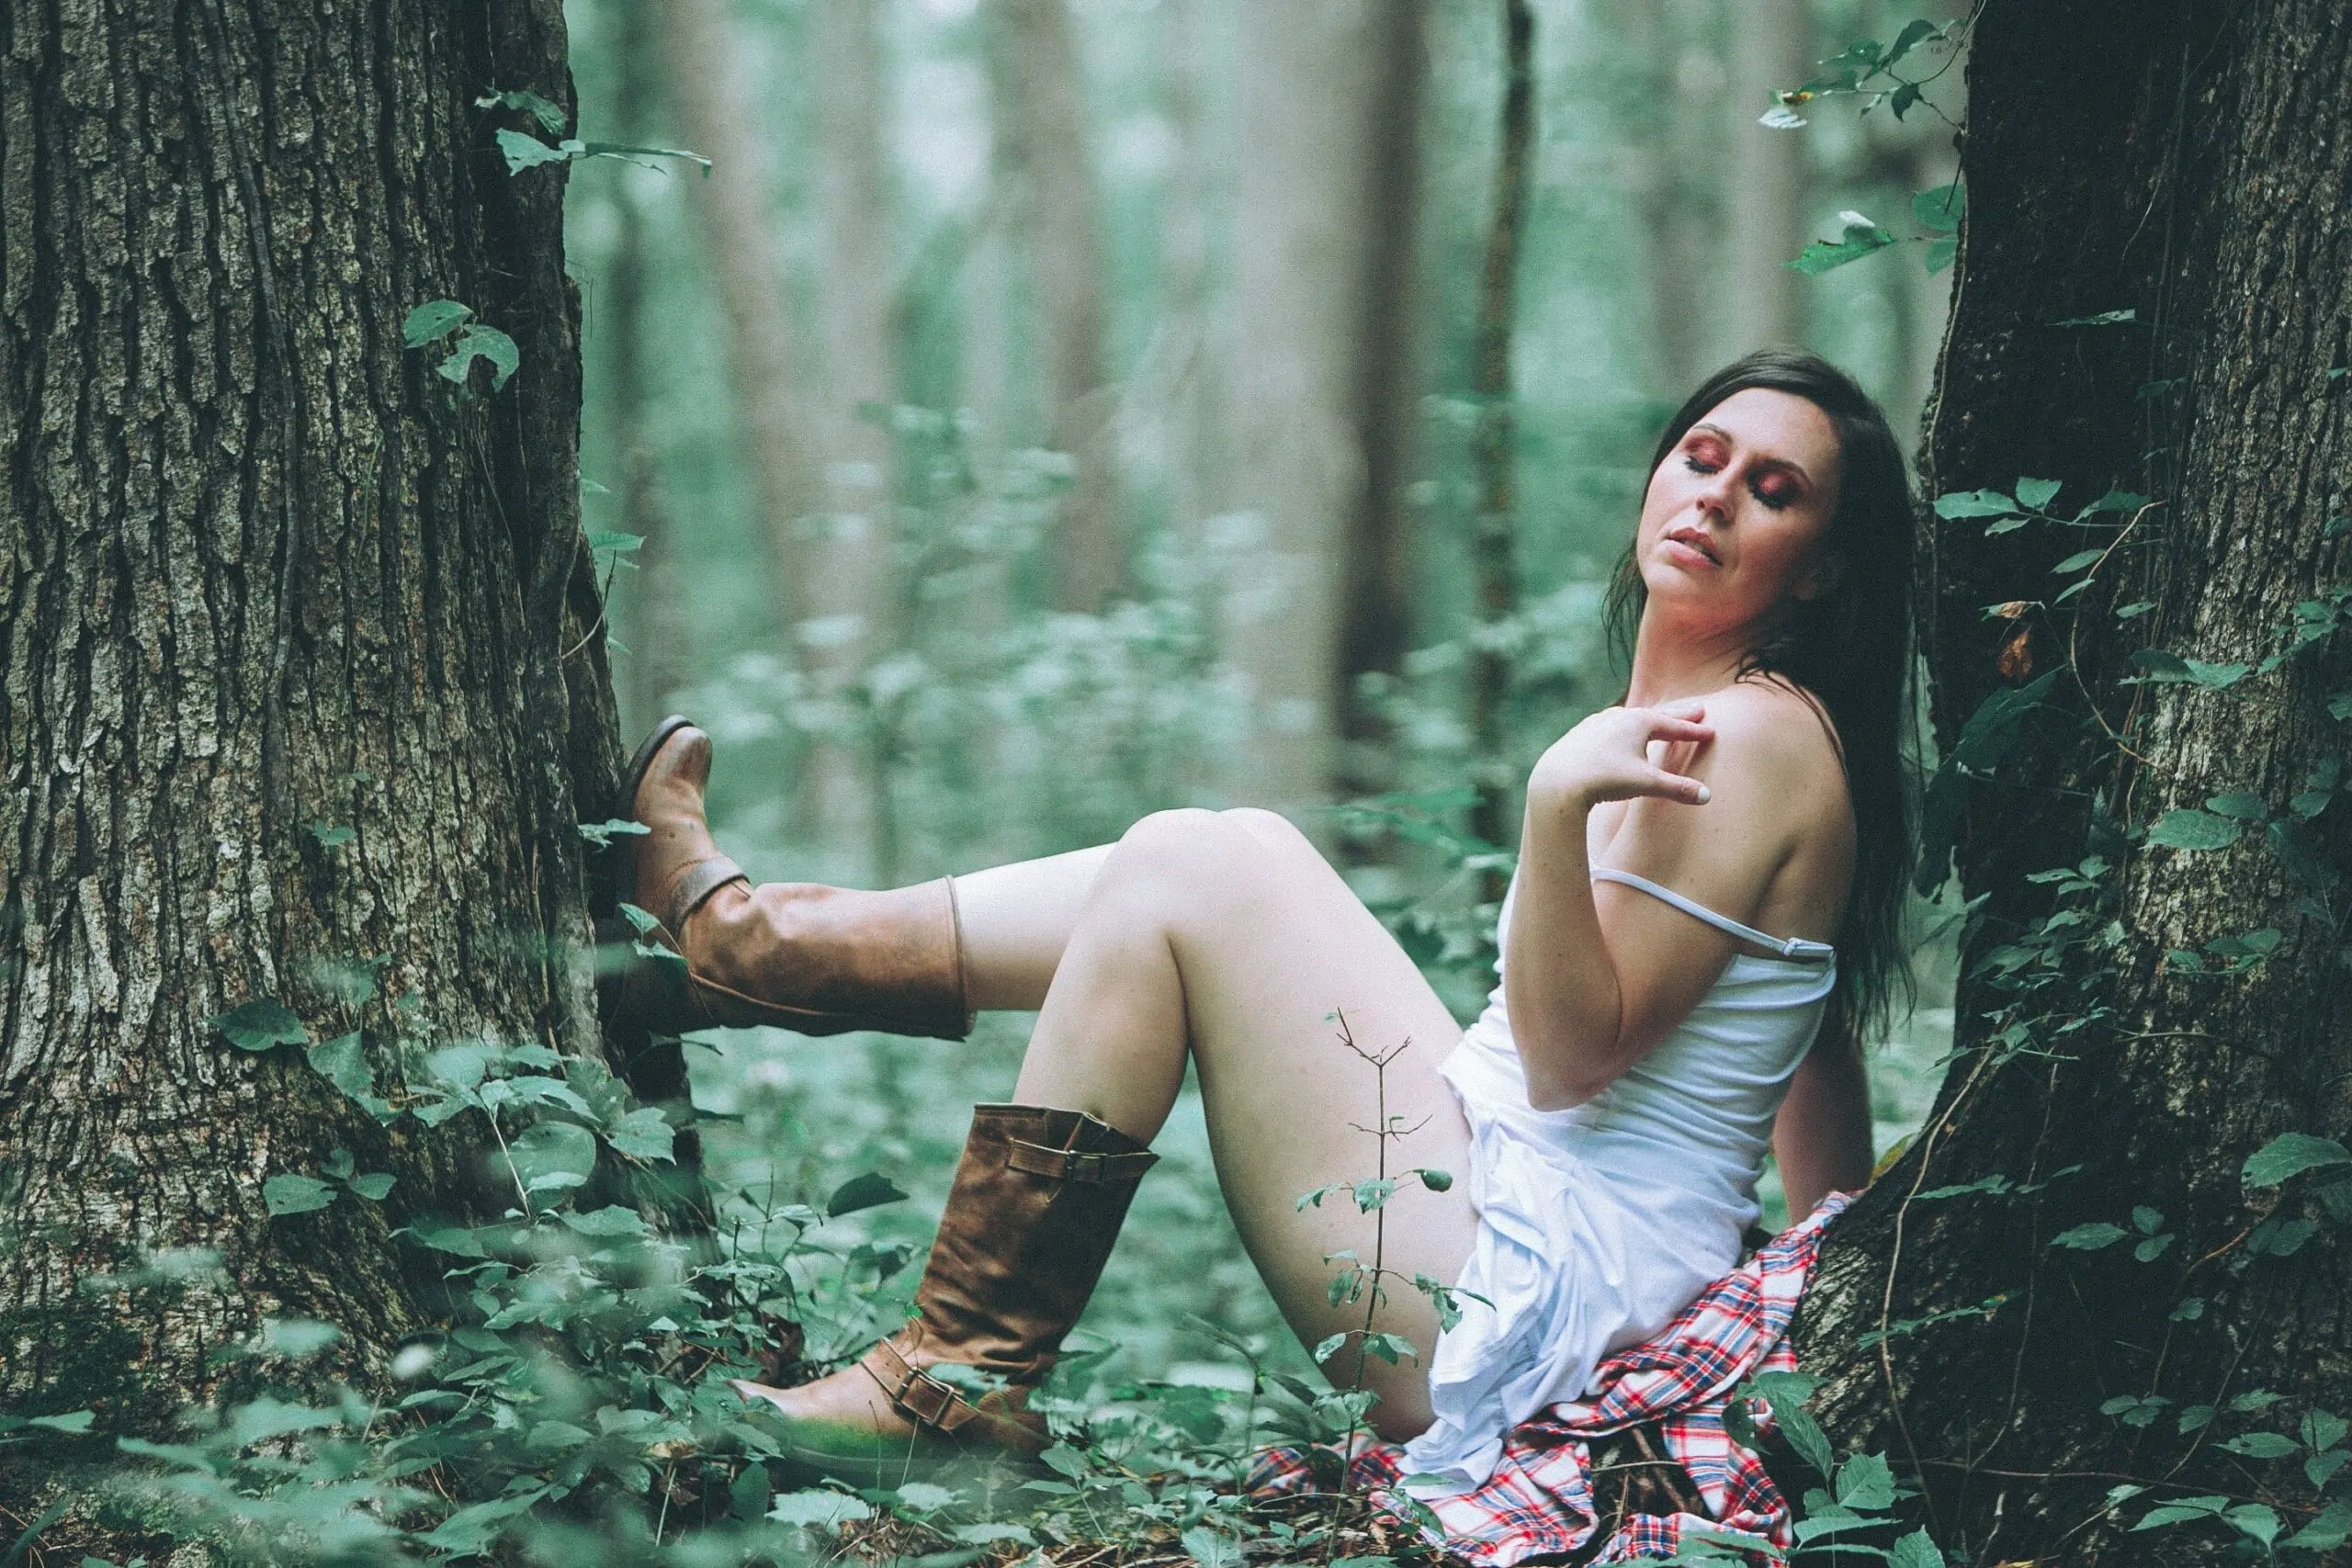 beautiful lady Boudoir picture in the forest